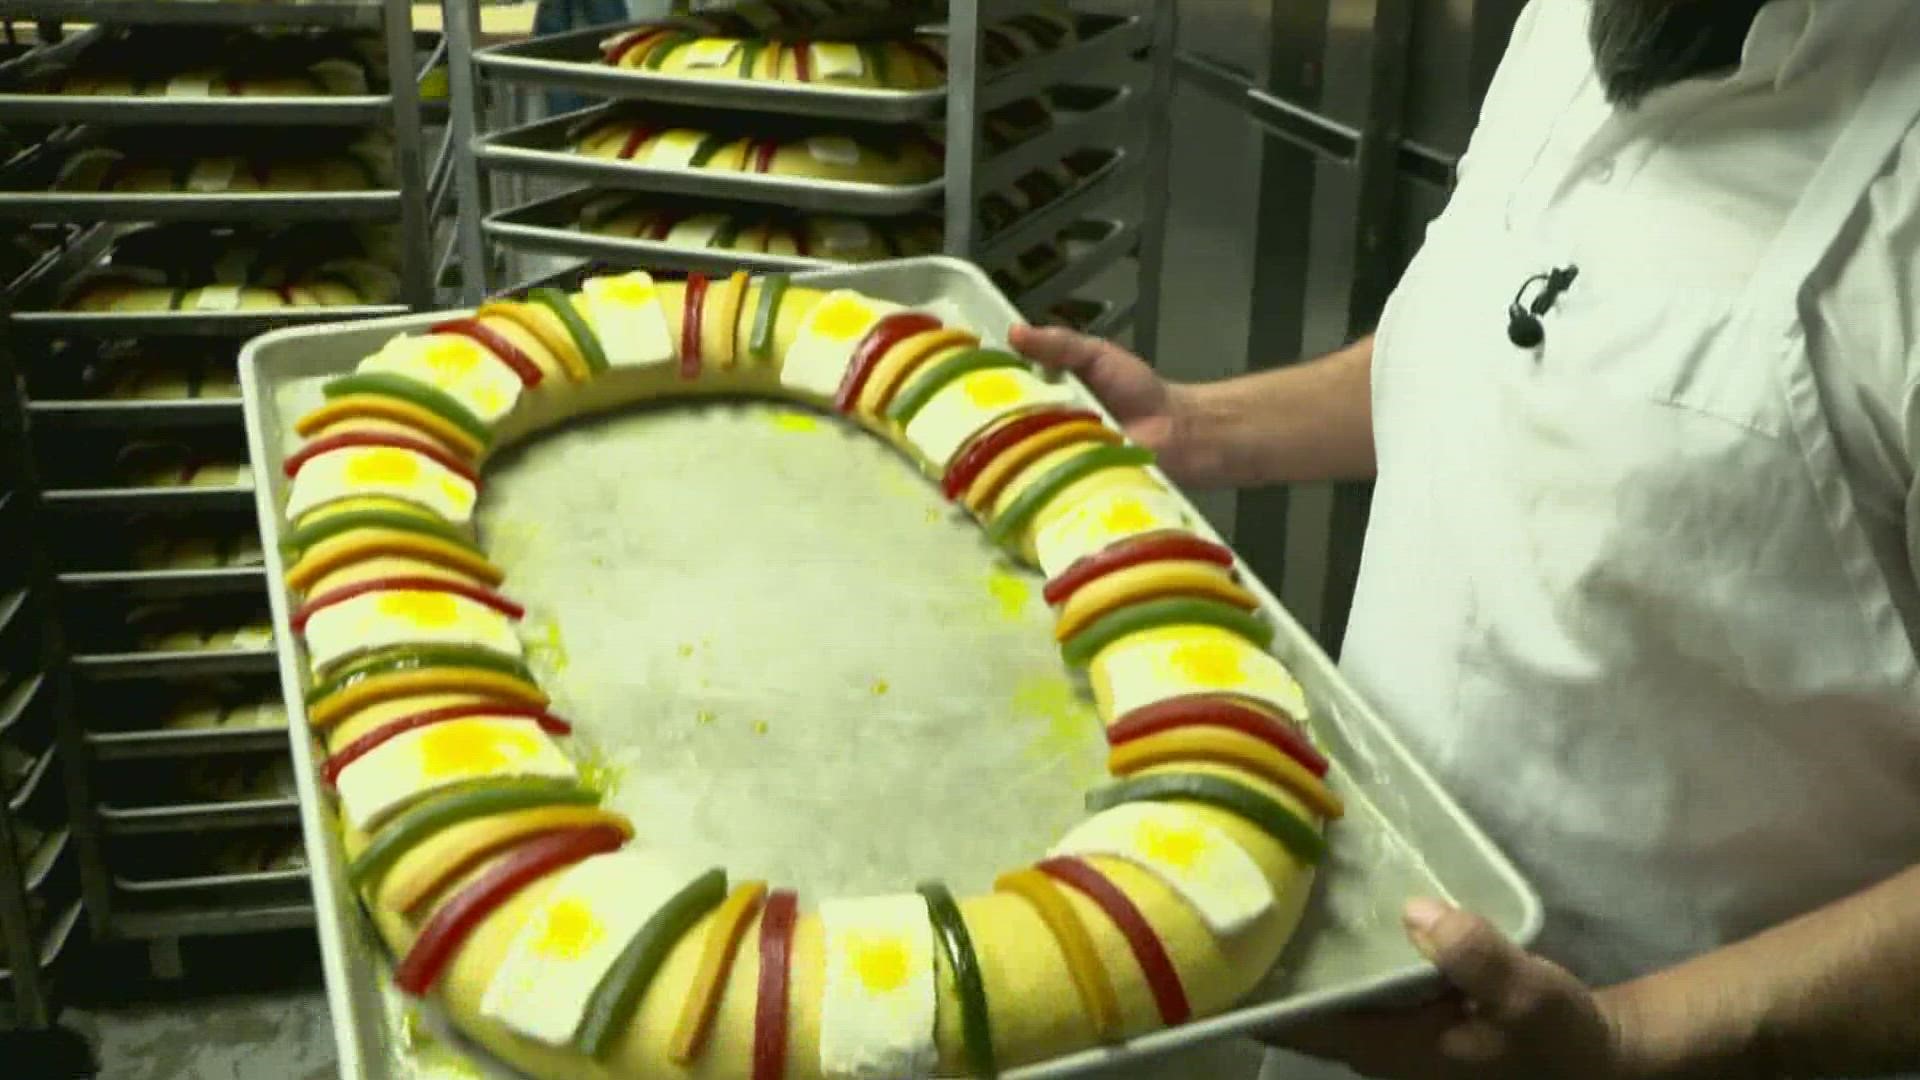 For 17 years, family-owned Panadería Don Goyo has baked Rosca De Reyes on Three Kings Day. This year, the owner saw higher demand for it.